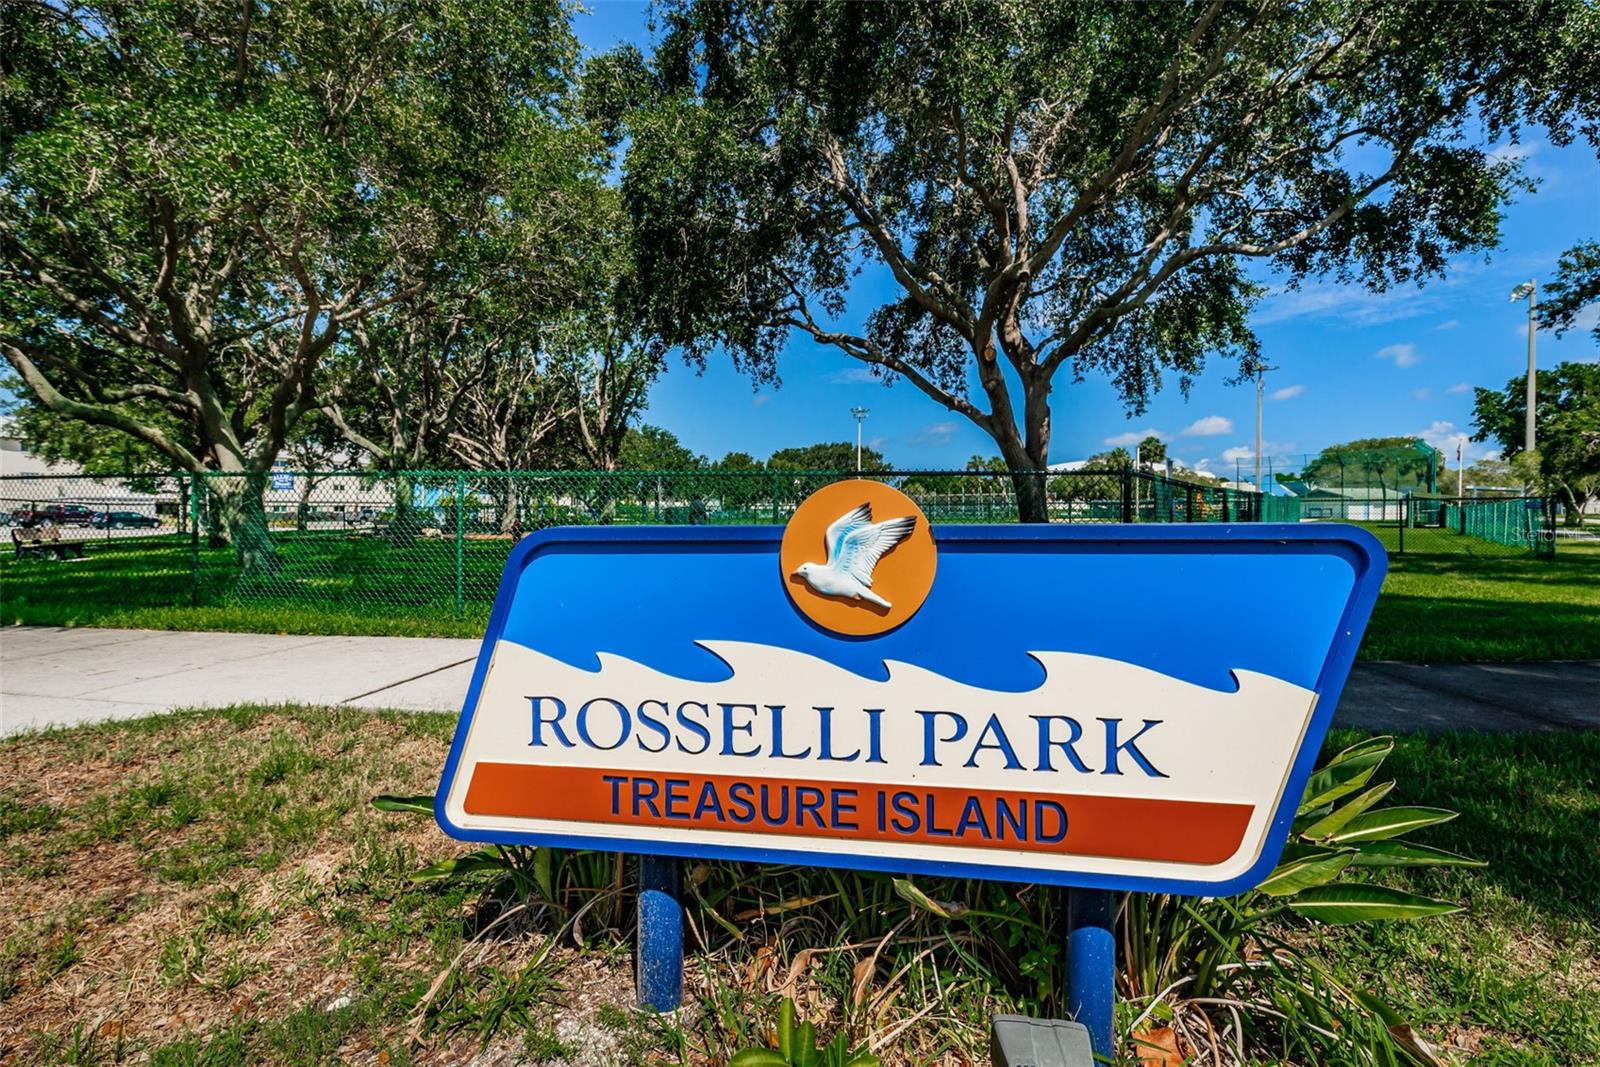 A short walk to Roselli Park